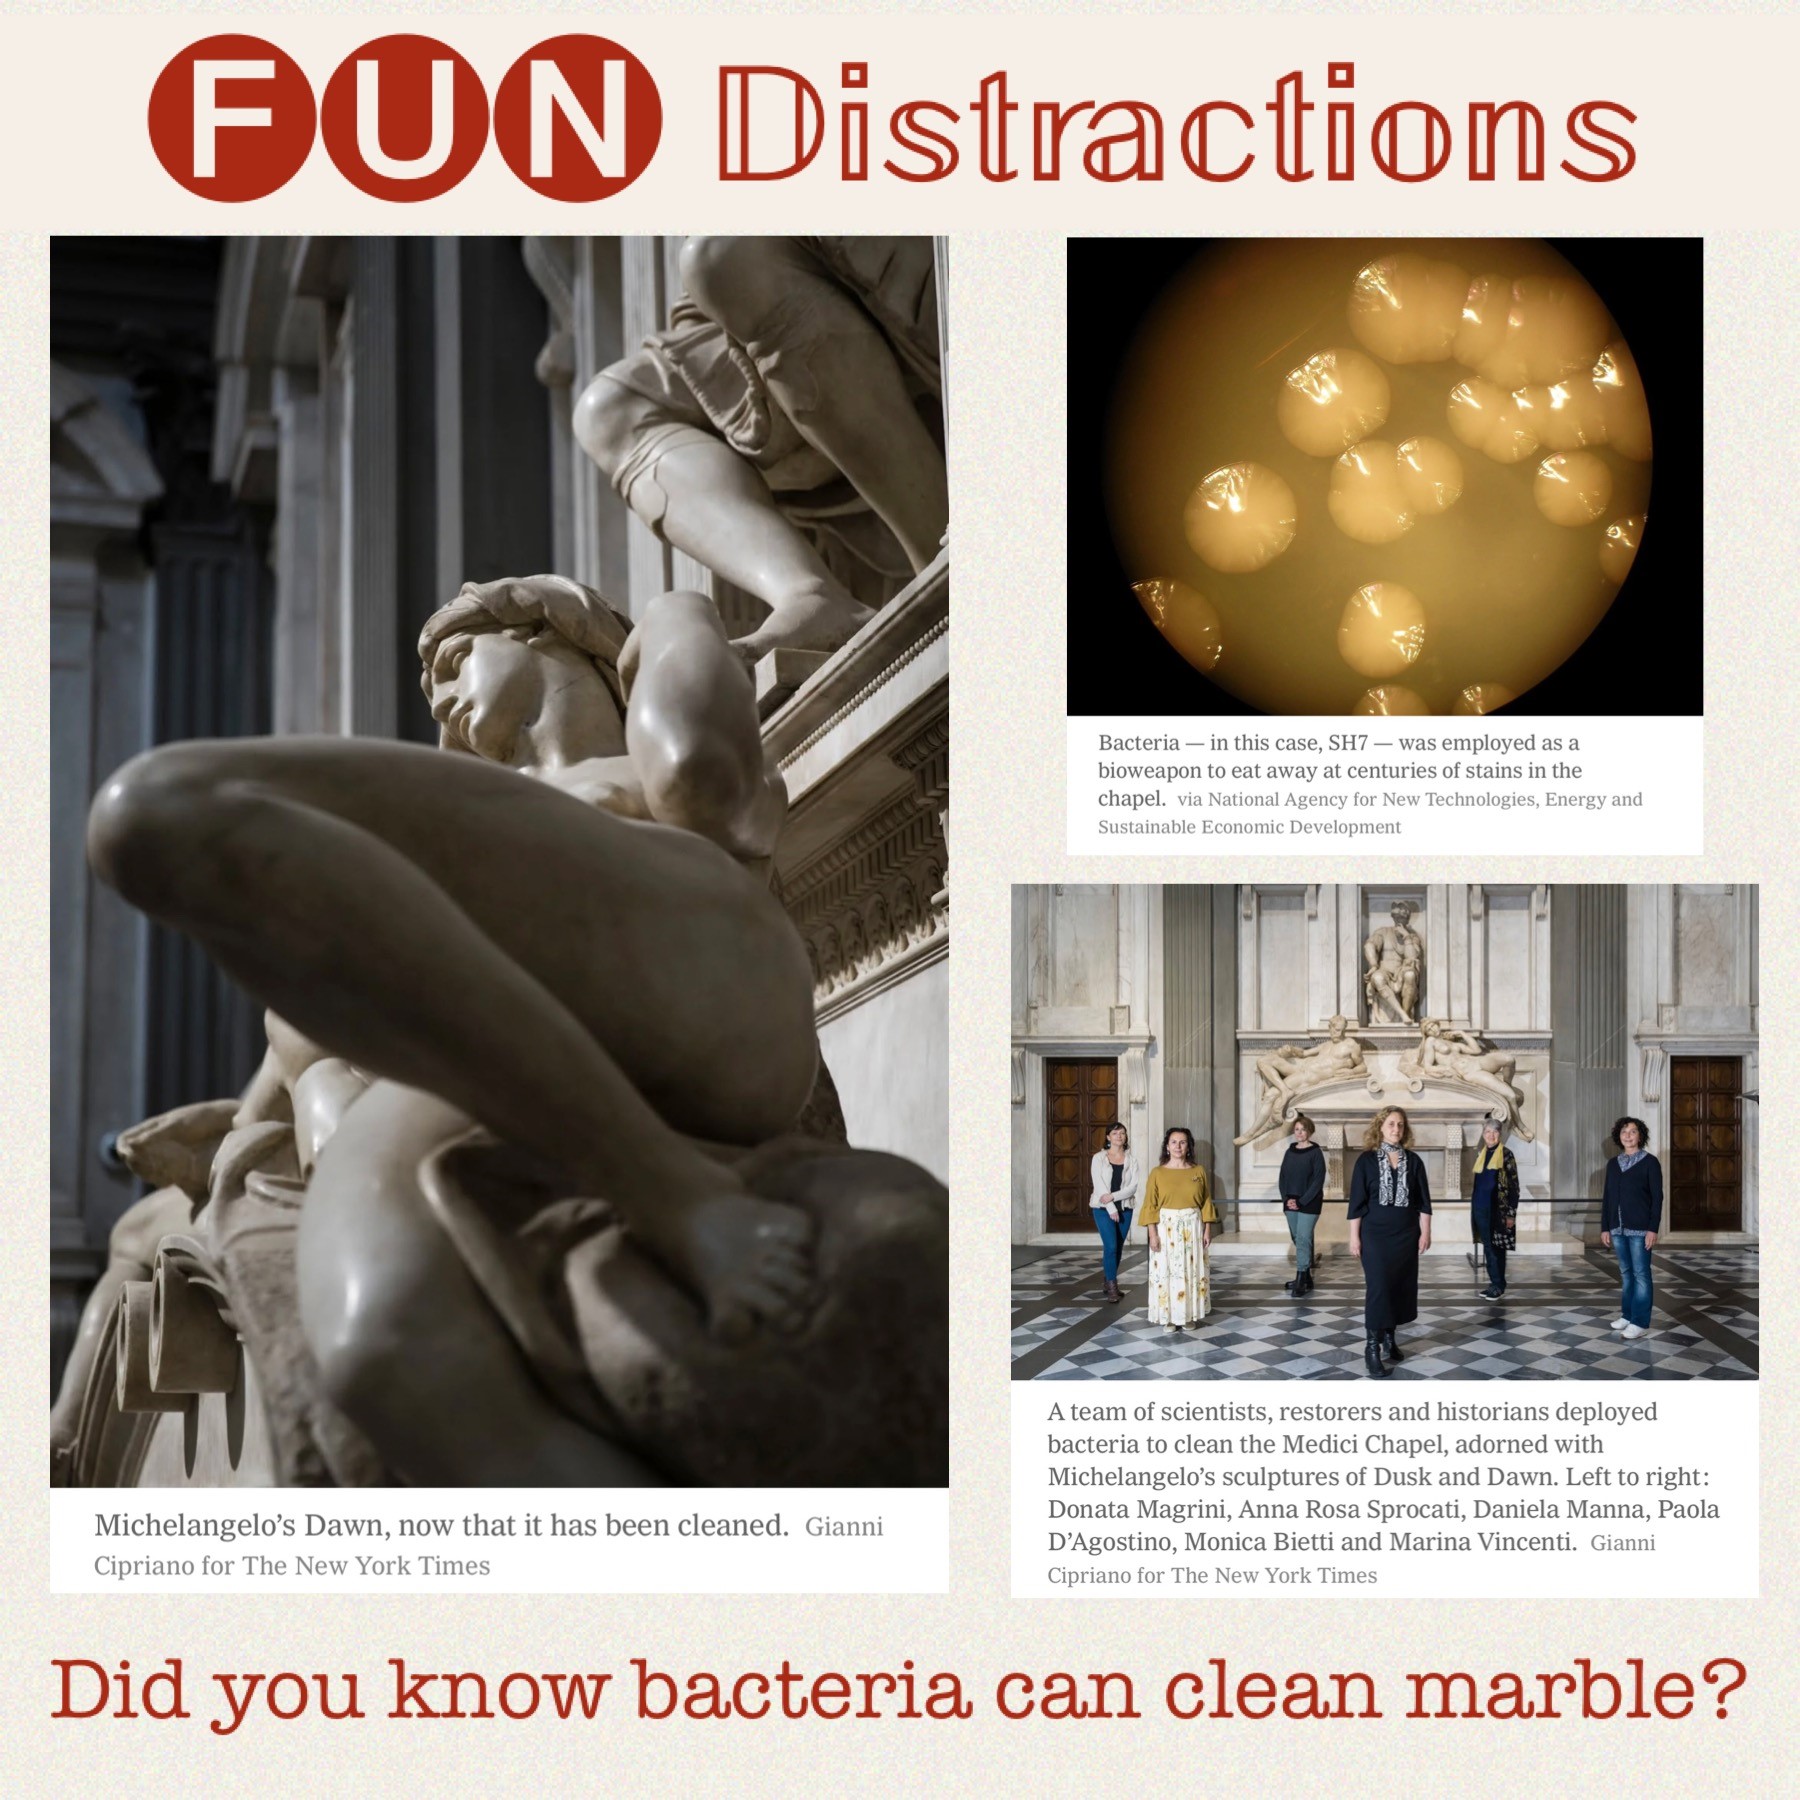 Image of Michelangelo's scupture, Dawn; microscopic image of bacteria; and an image of six scientists